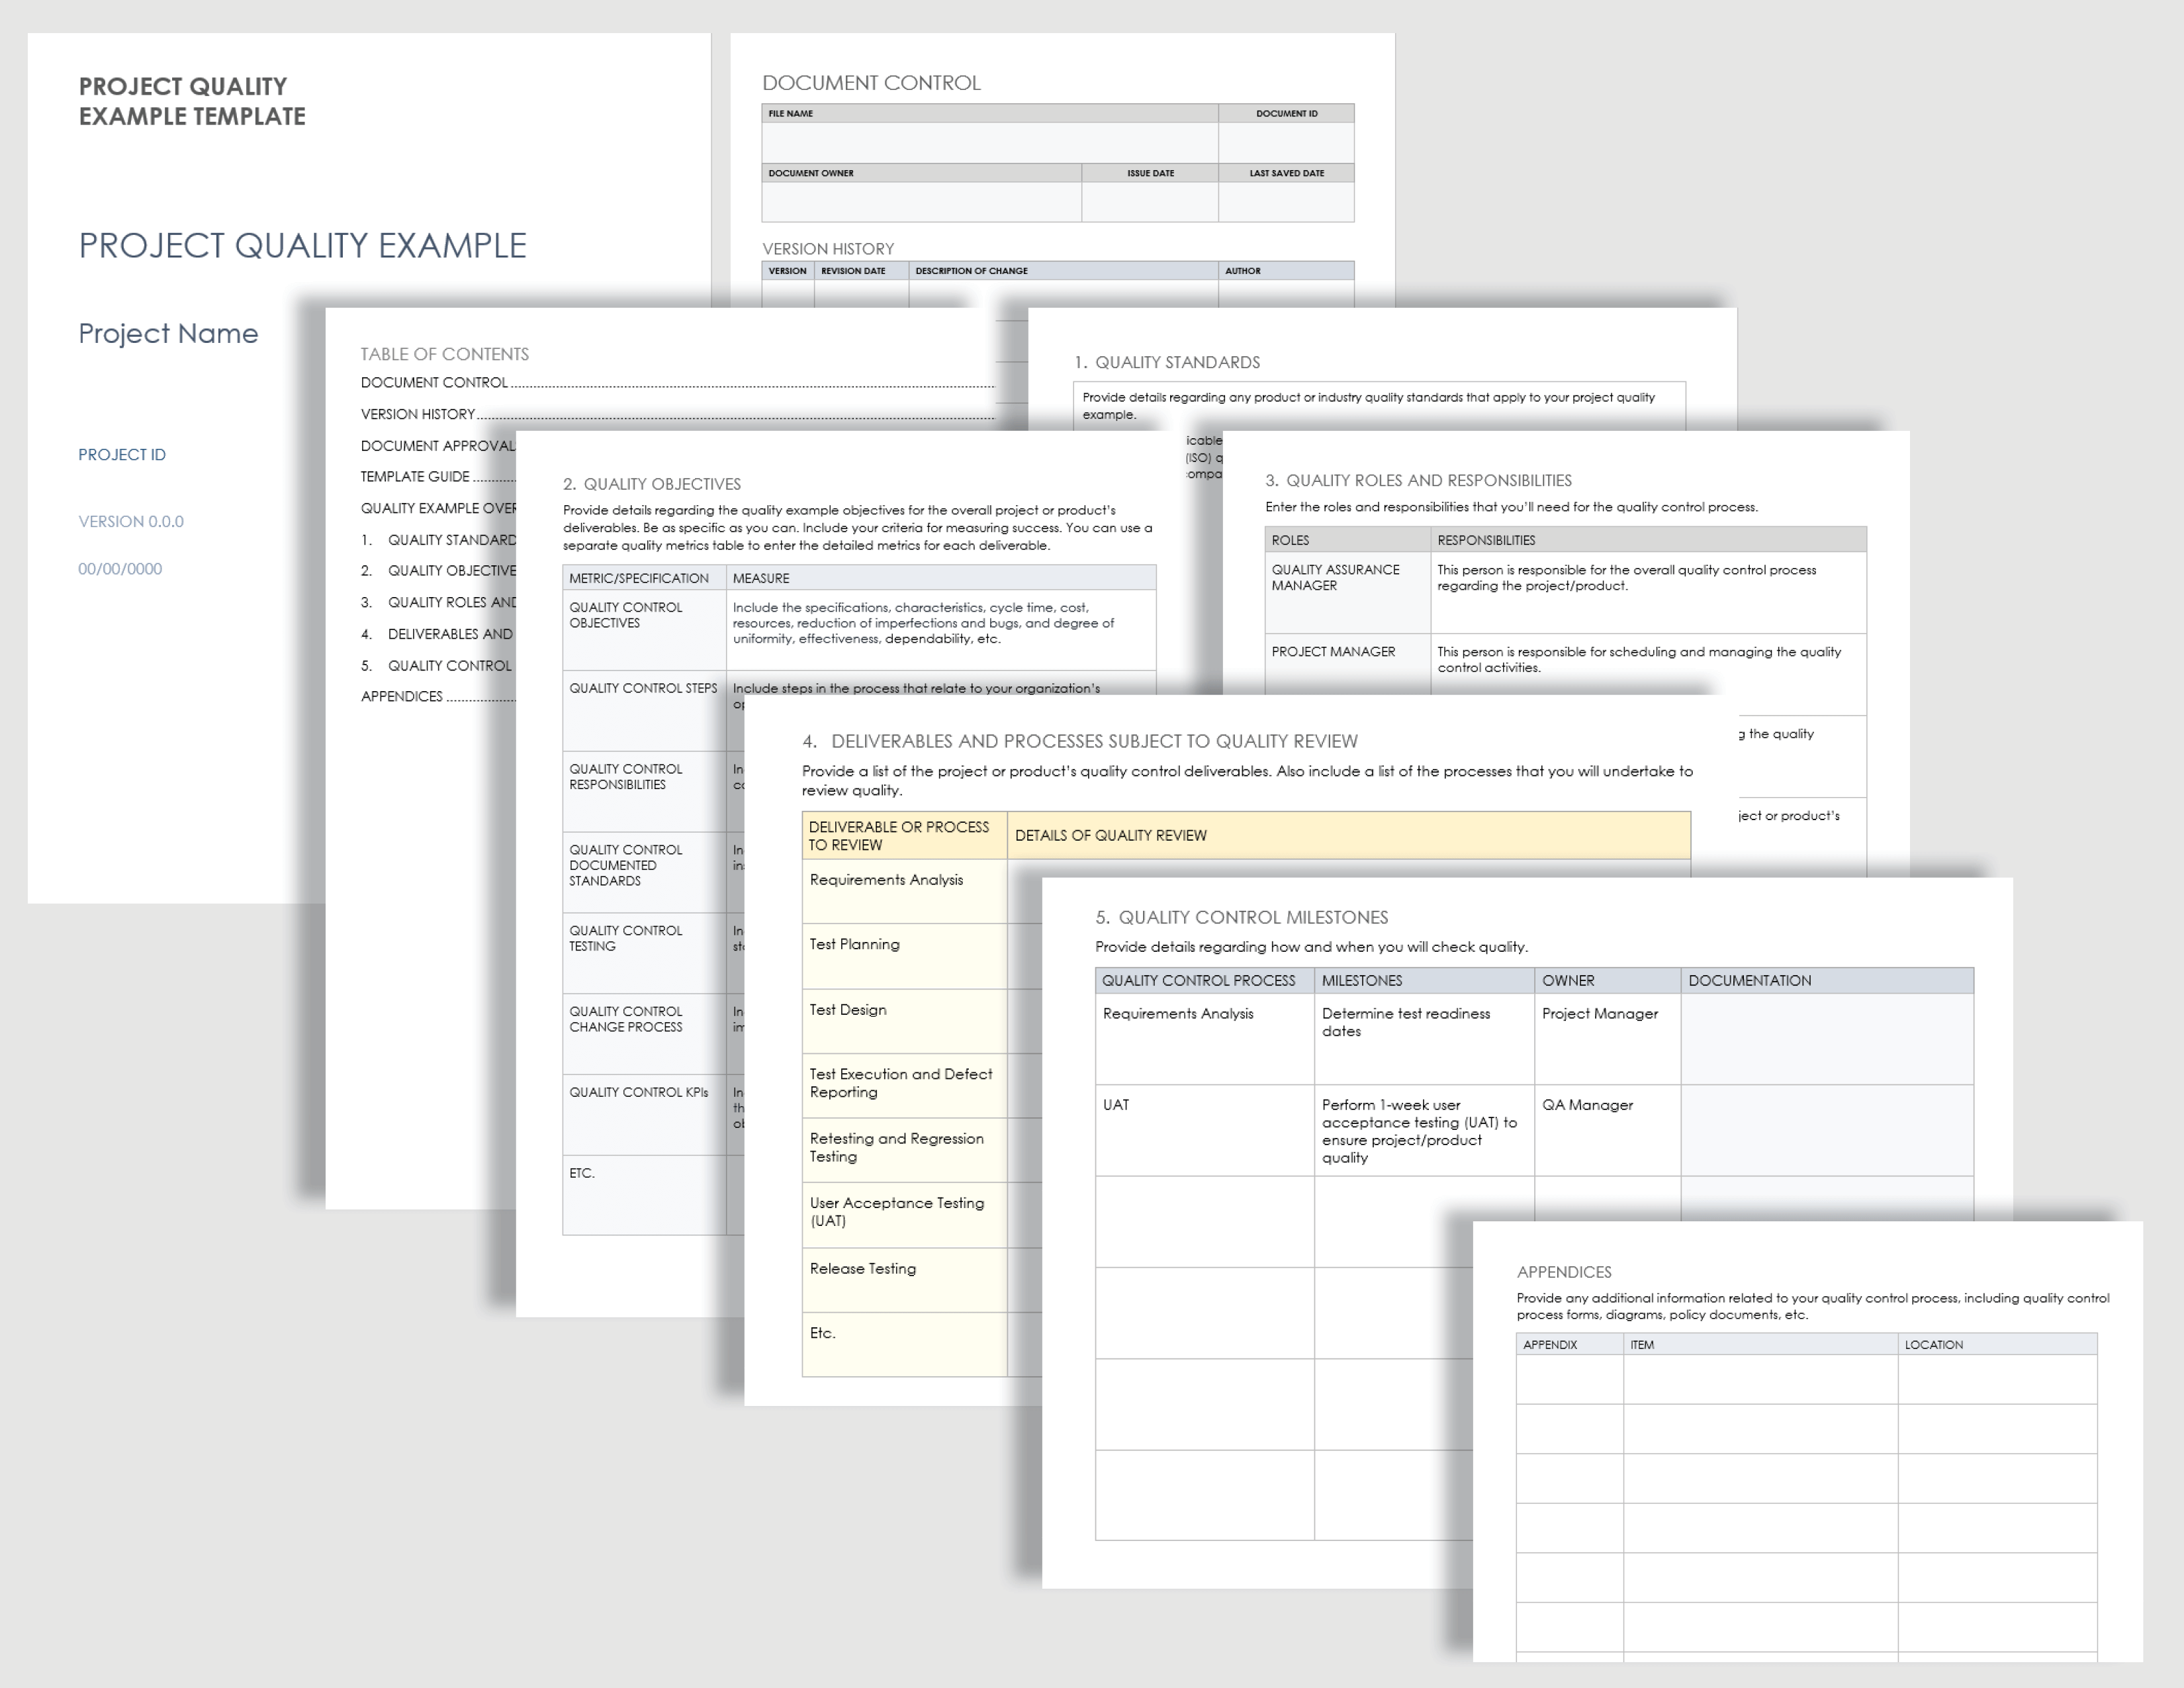 Project Quality Example Template